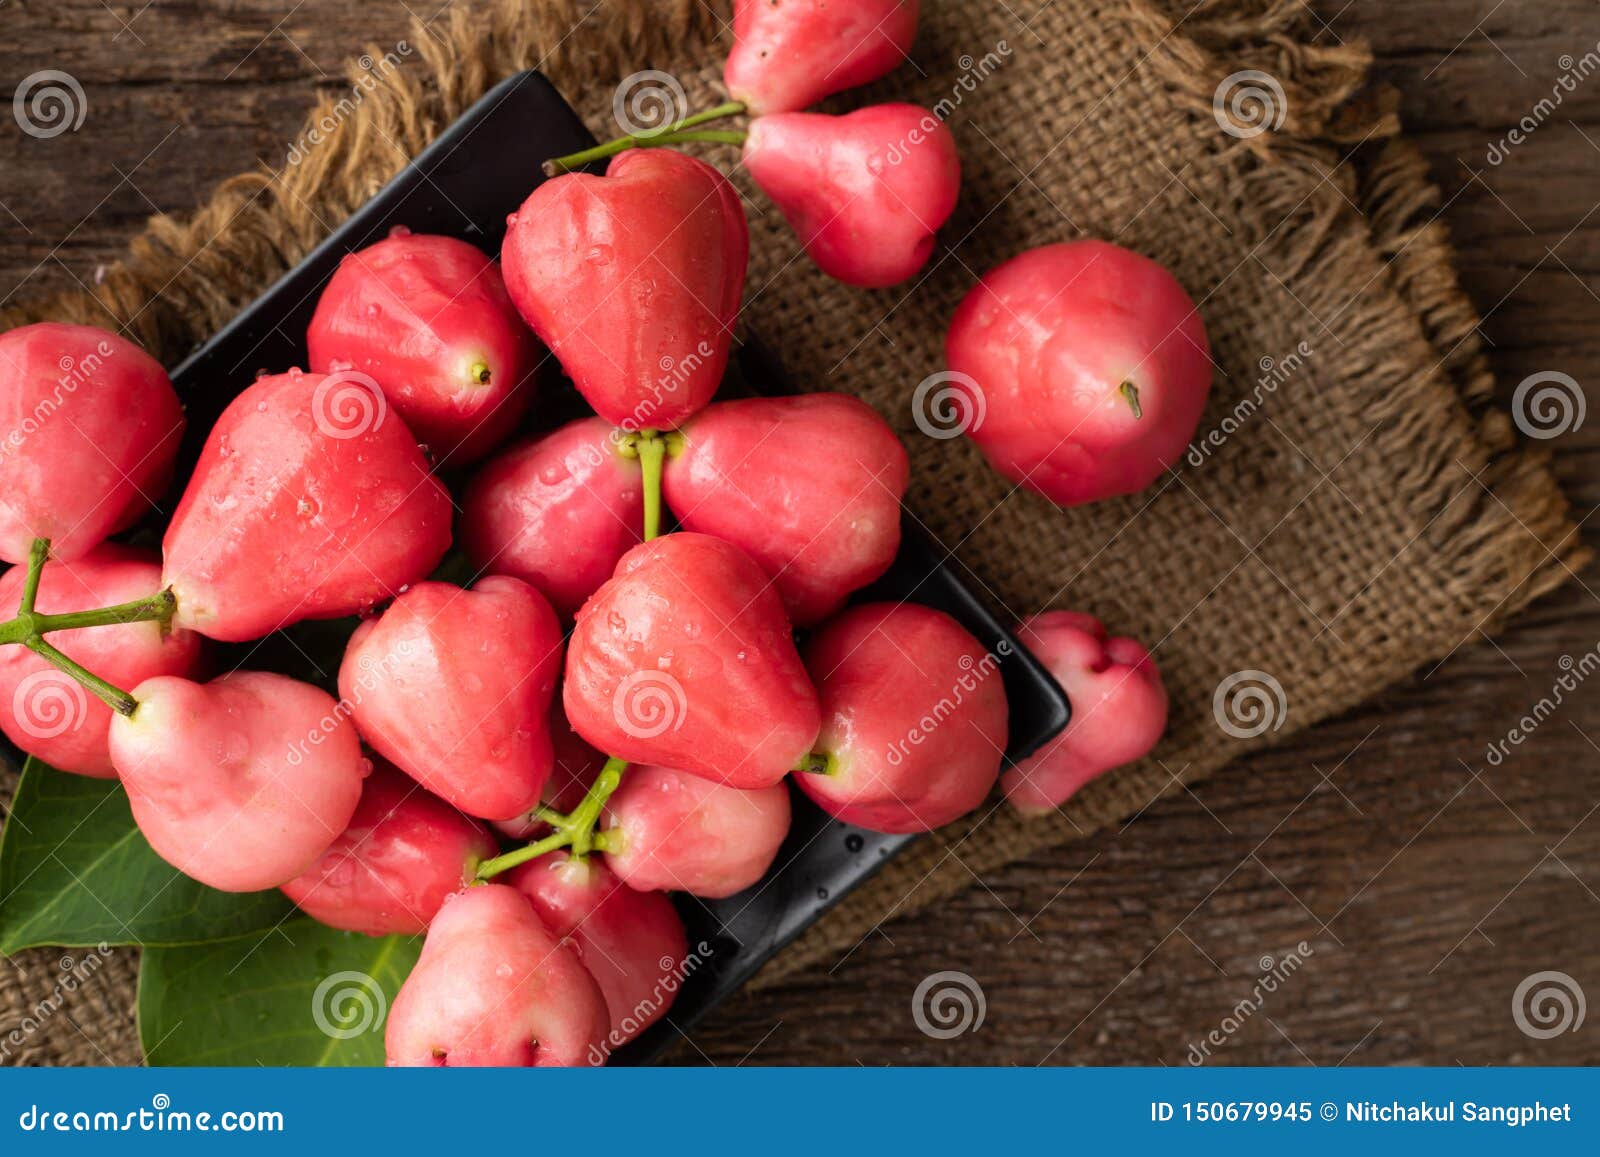 Grater And Fresh Ripe Apple On Wooden Board, Closeup Stock Photo, Picture  and Royalty Free Image. Image 175616454.